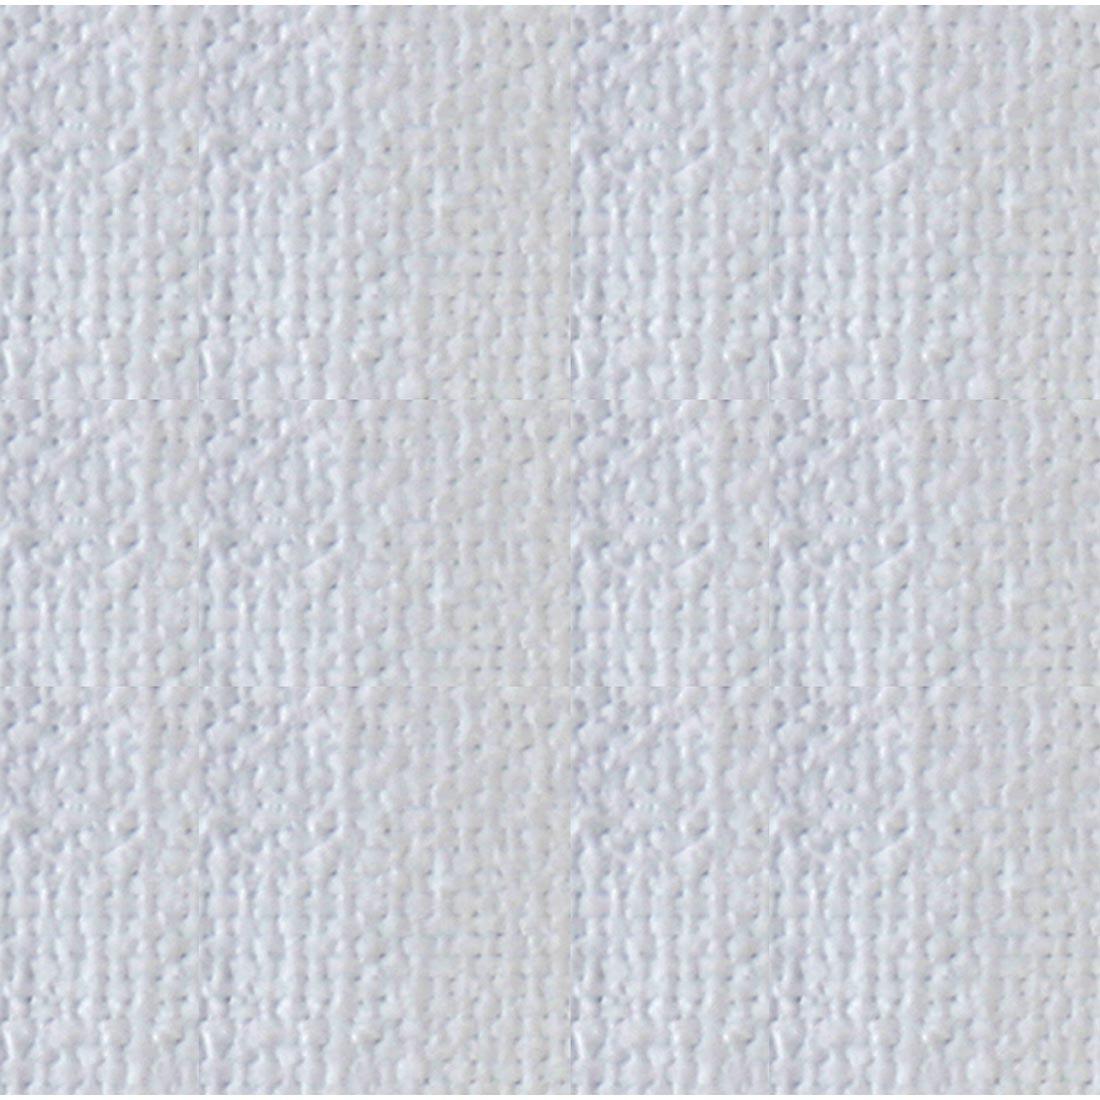 Fabric swatch from the Fredrix Scholastic Primed 9 oz. Canvas Roll